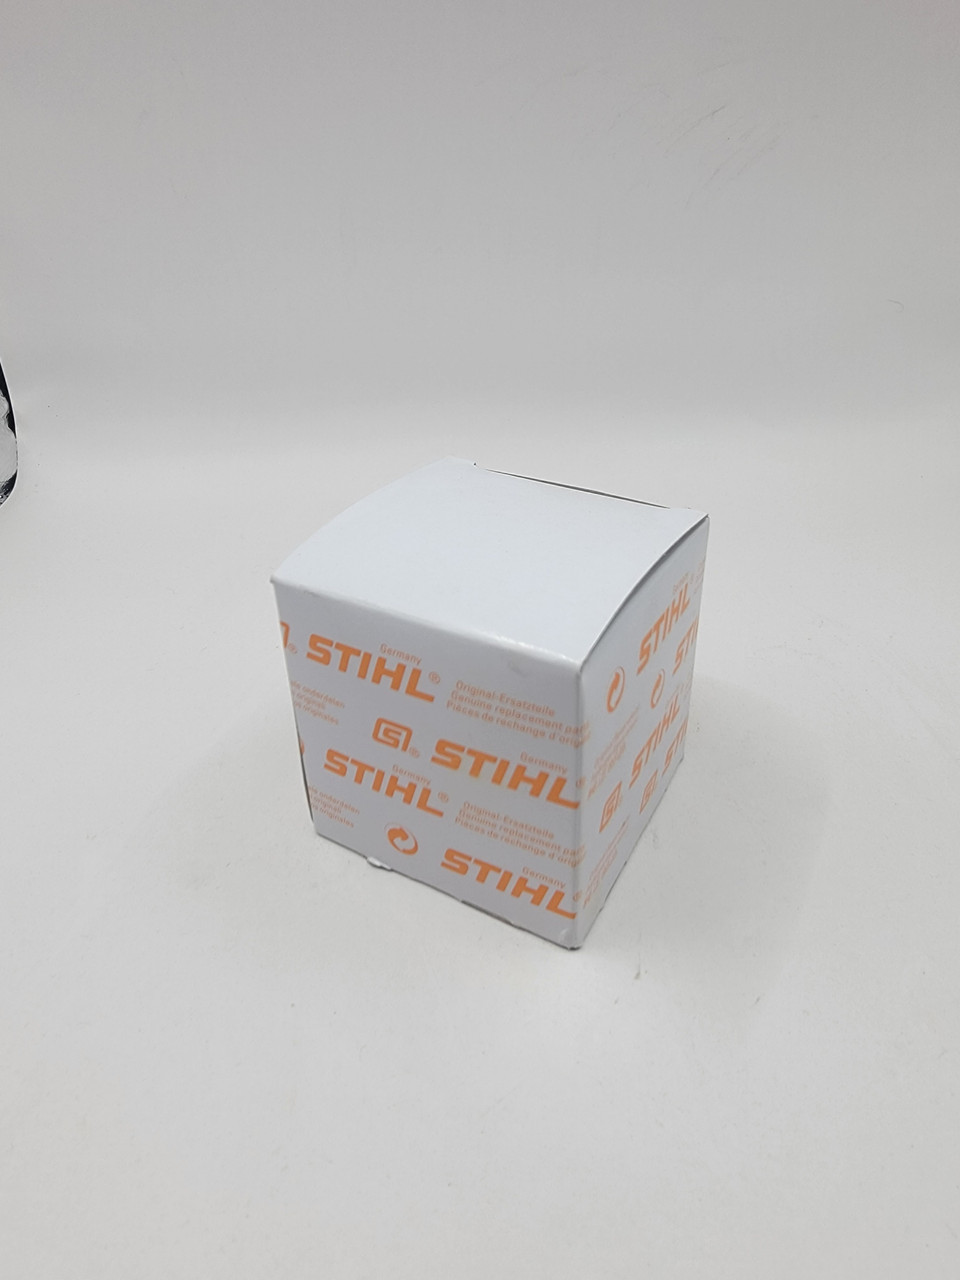 Stihl 4180 710 7121 DRIVE TUBE ASSEMBLY 25.4MM FBD-KM BED REDEFINER one package